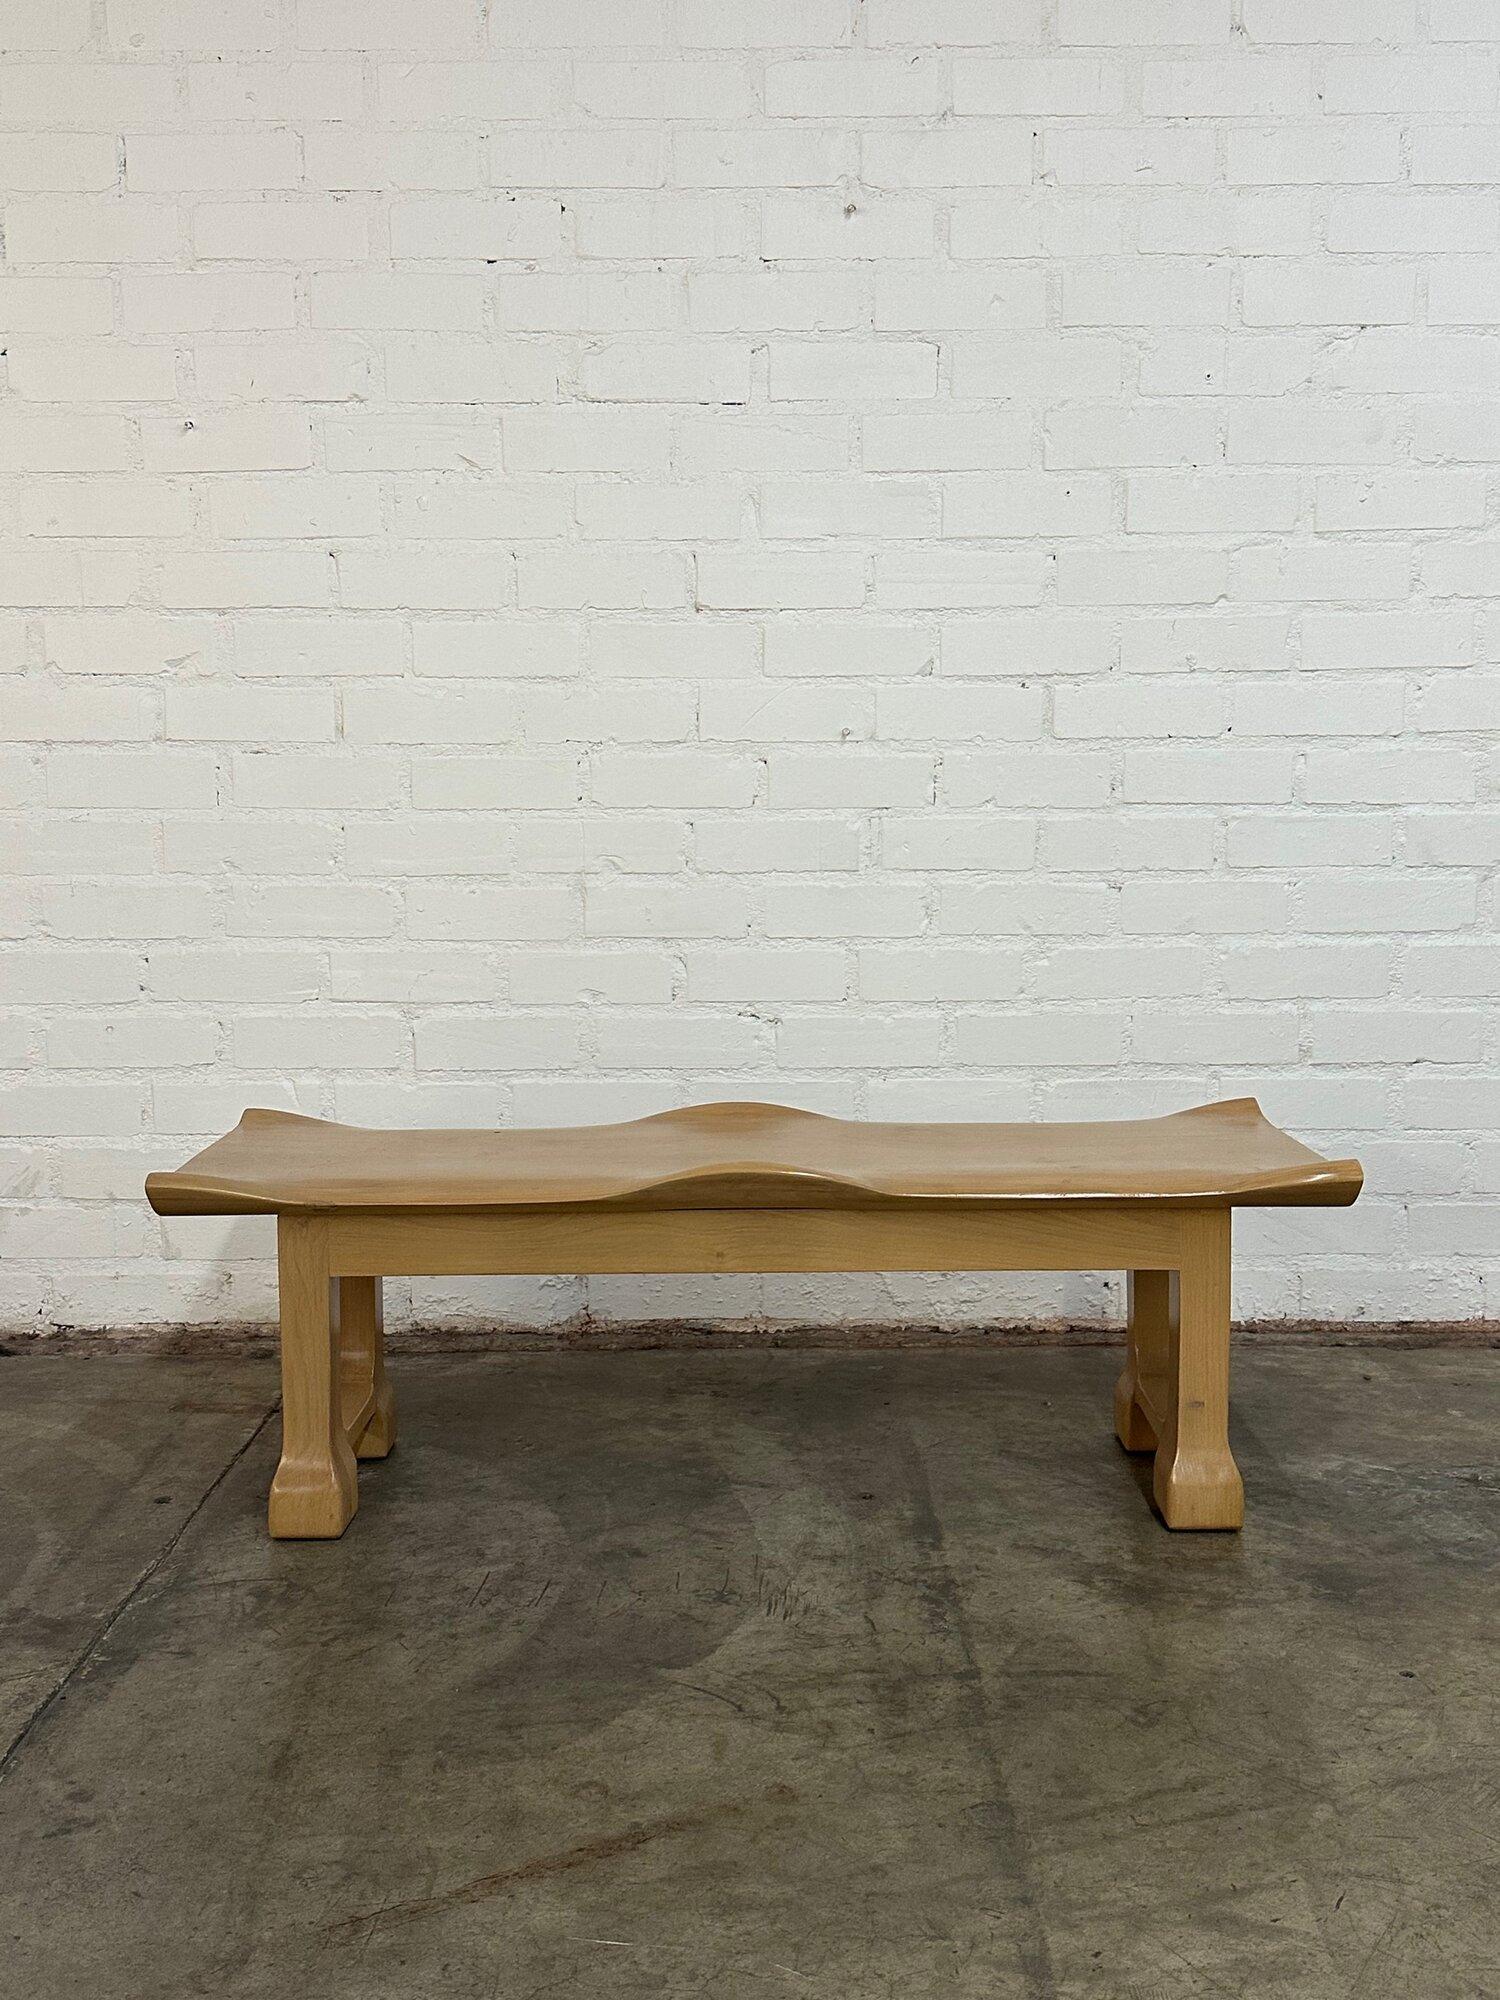 W54 D19 H17.5

Sculptural handcrafted bench made in house. Item is made in solid maple and stained in a light white wash. Item features solid wood construction. This item is made completely in house and can be made in different dimensions and